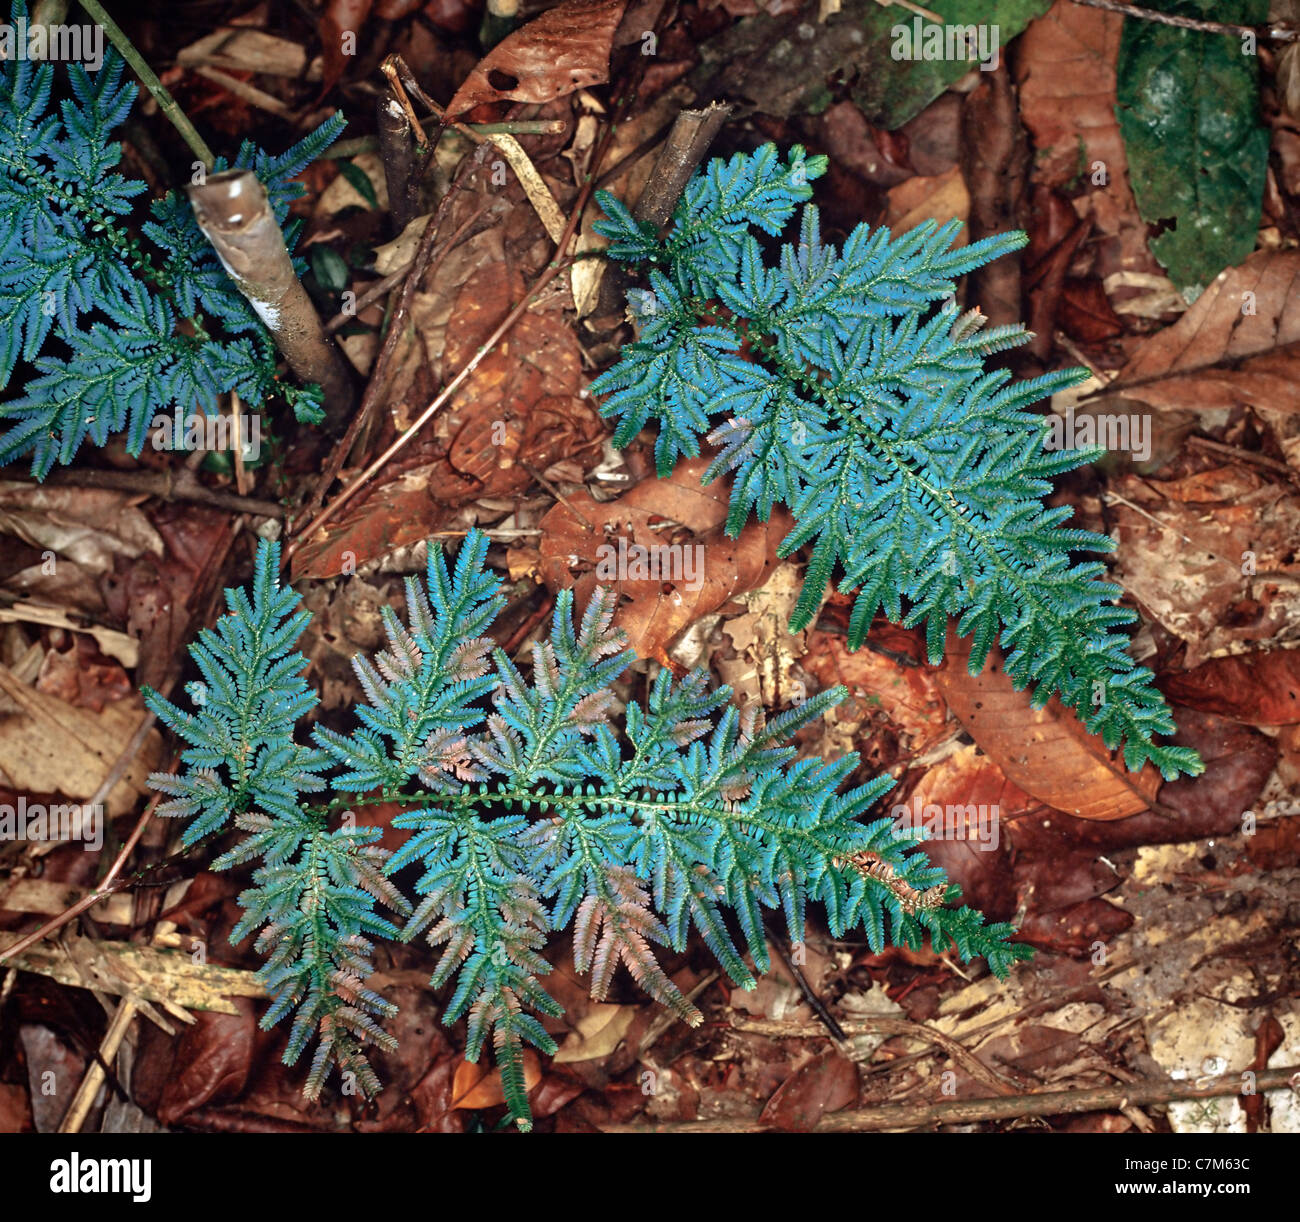 Forest ferns growing on the forest floor, Mulu National Park, Sarawak, Borneo, East Malaysia Stock Photo